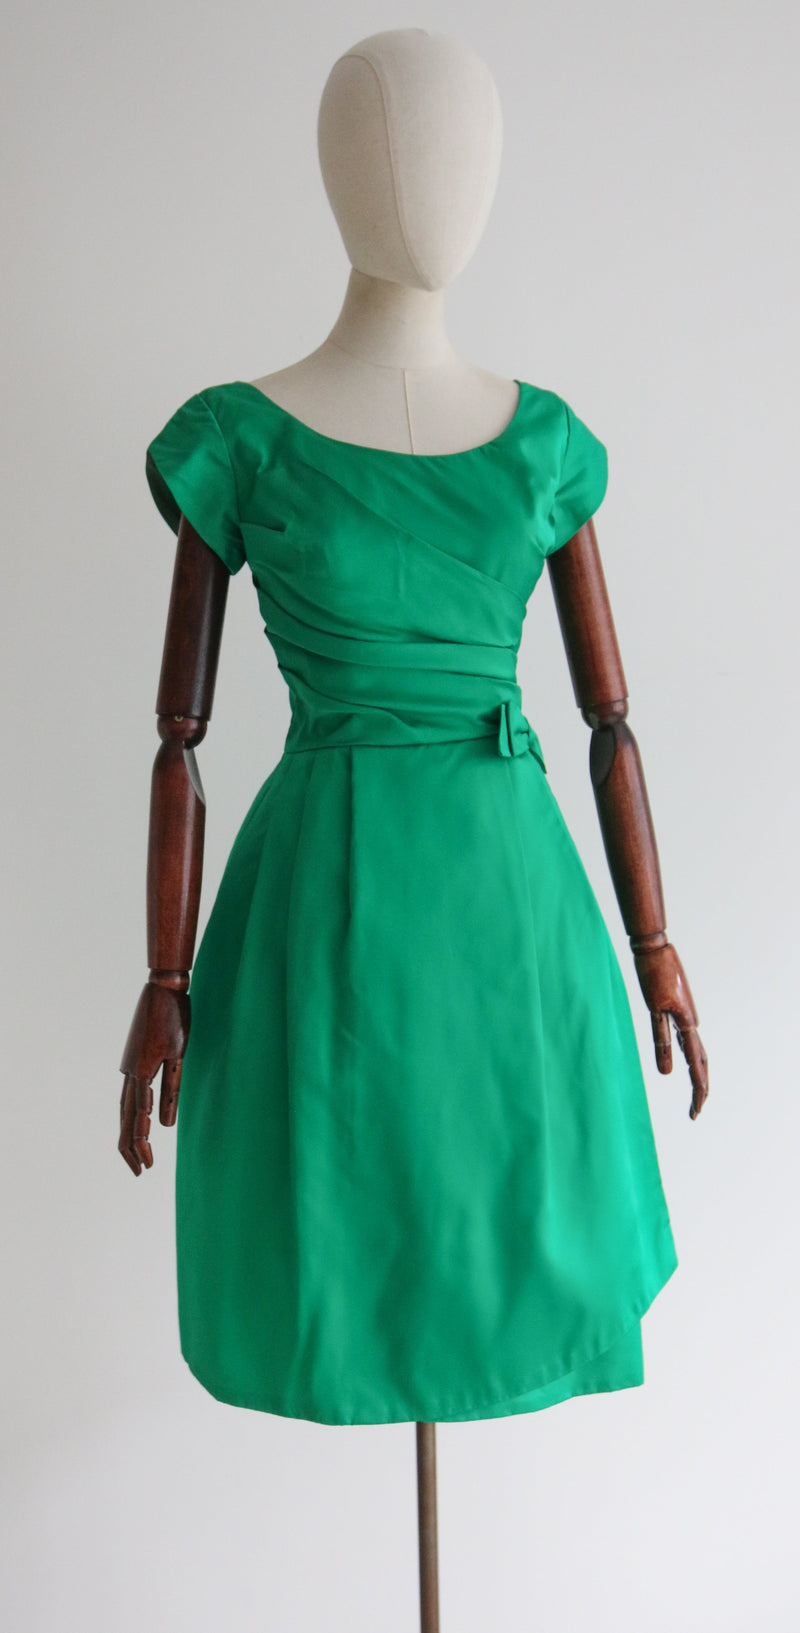 "Emerald Bow" Vintage 1950's Emerald Green Pleated Bow Dress UK 8 US 4